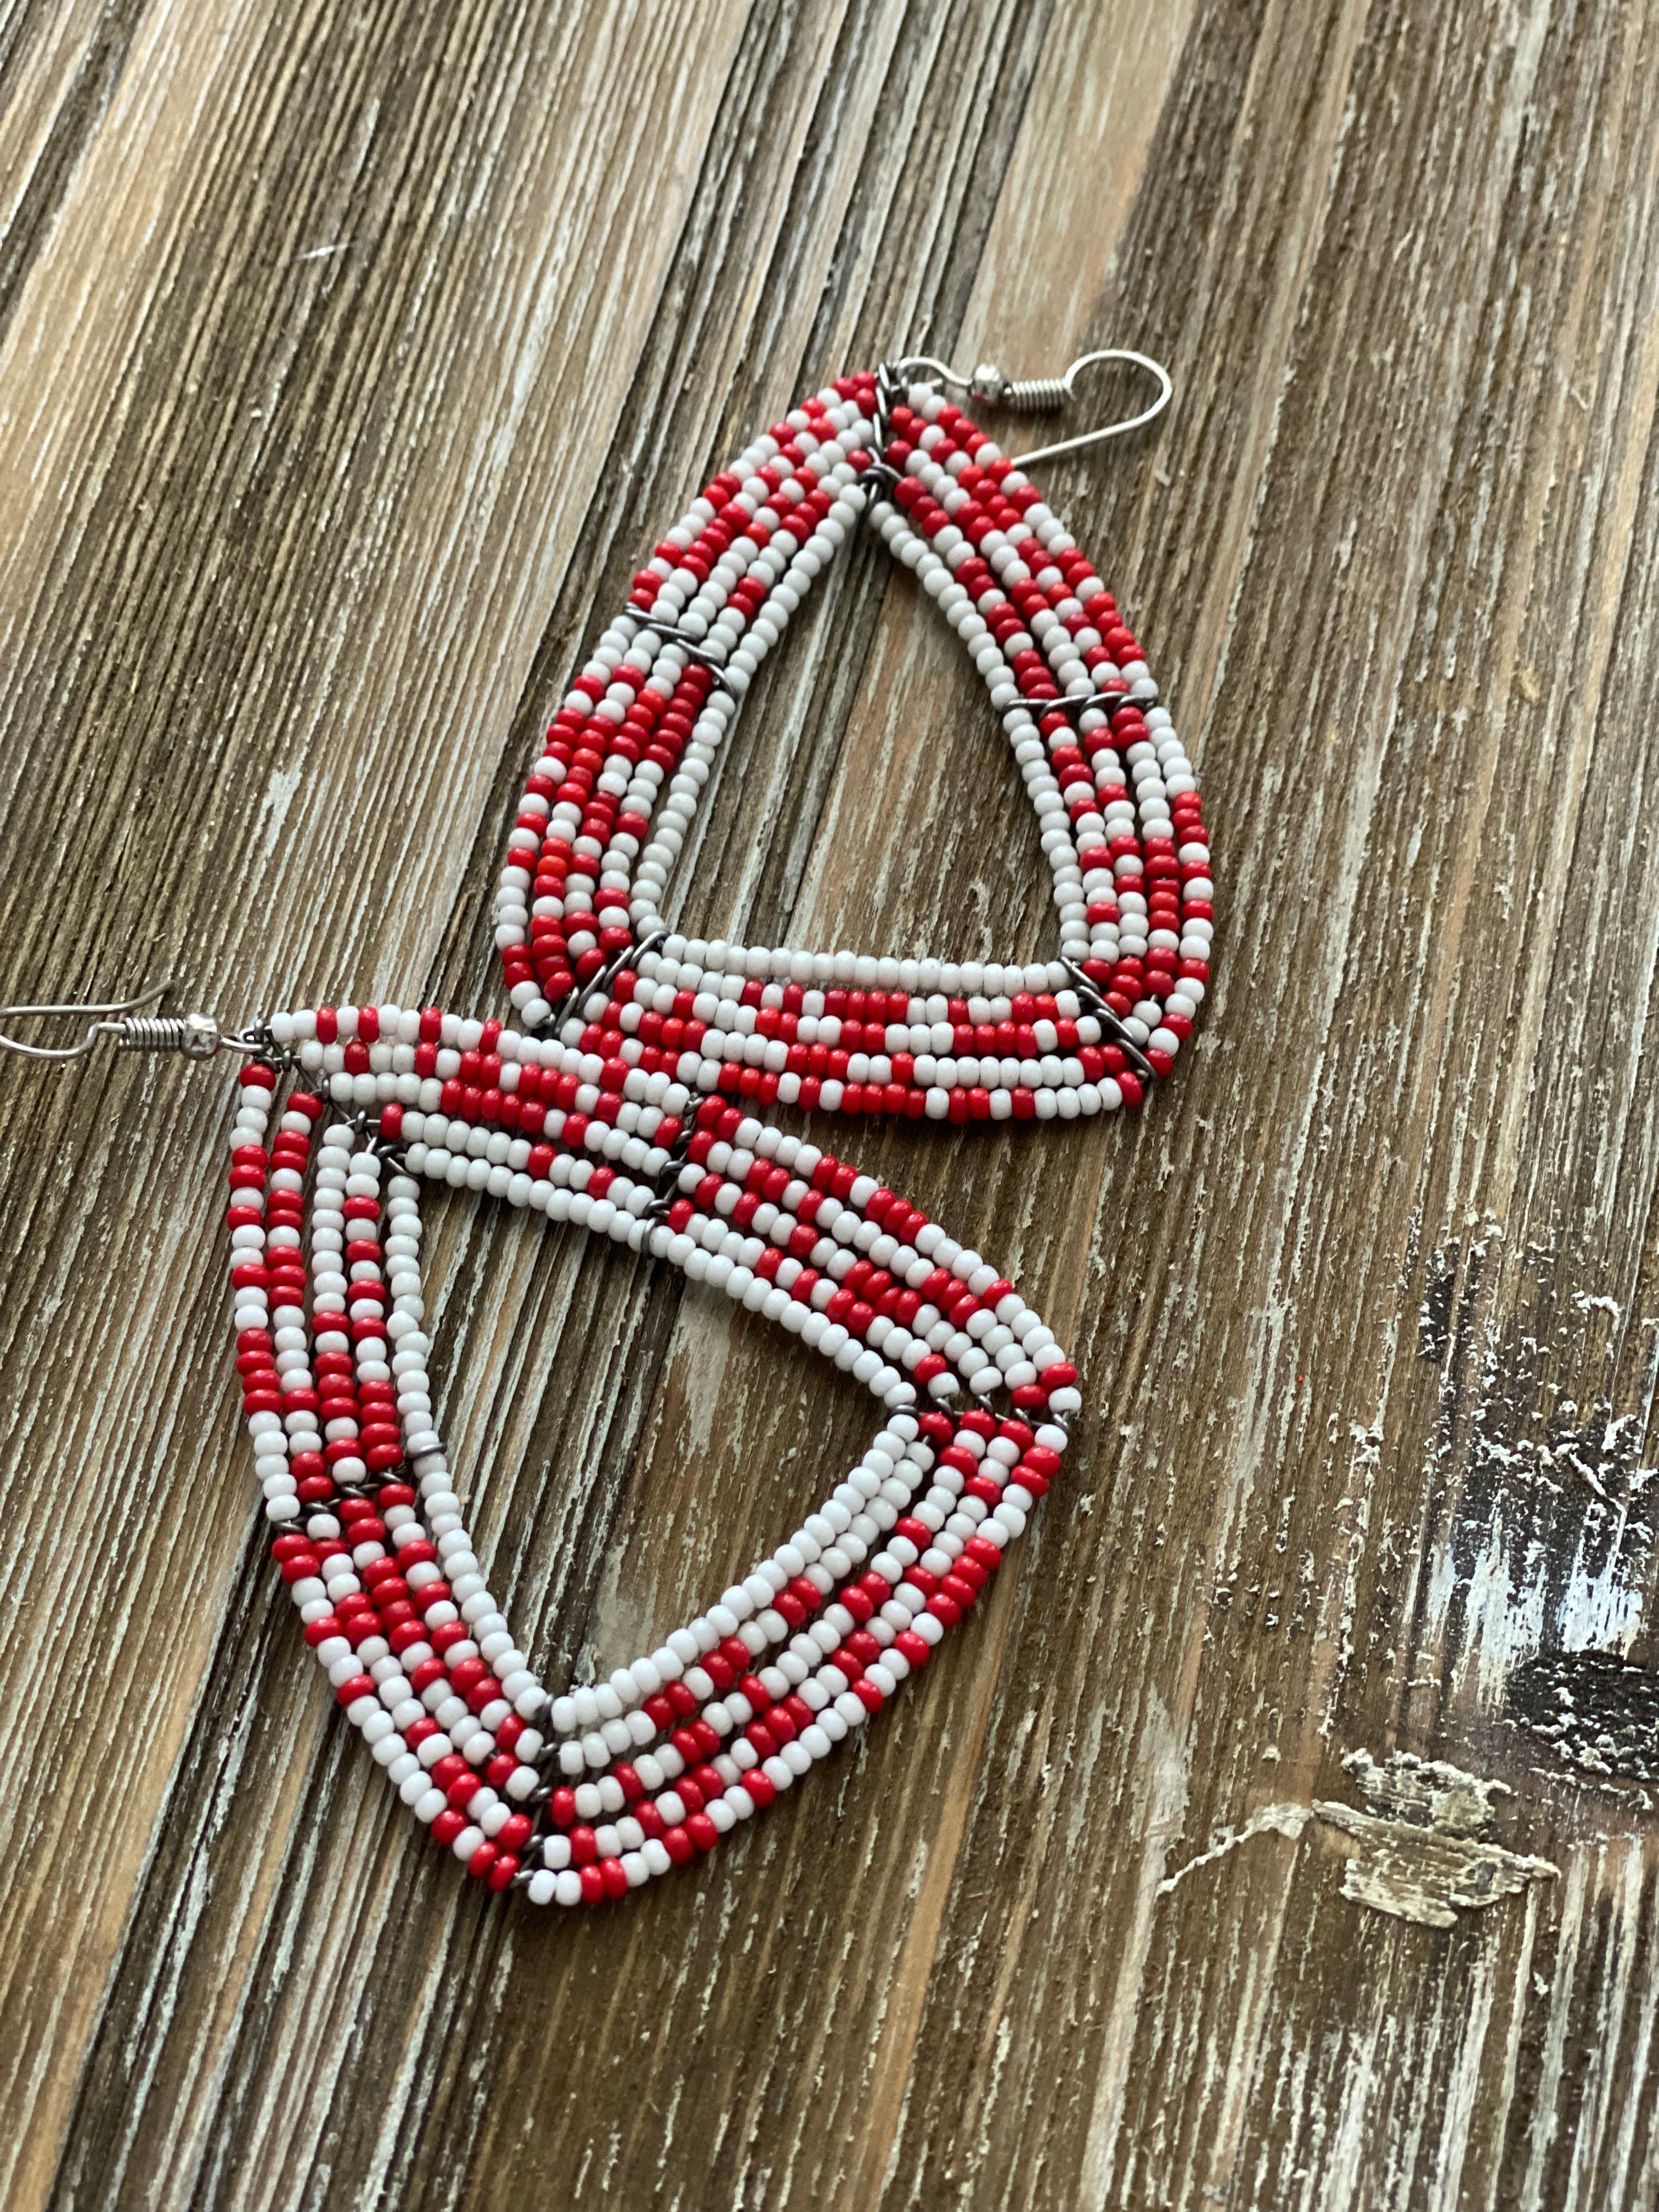 Handmade Beaded Red and White Pyramid Earrings - Assorted